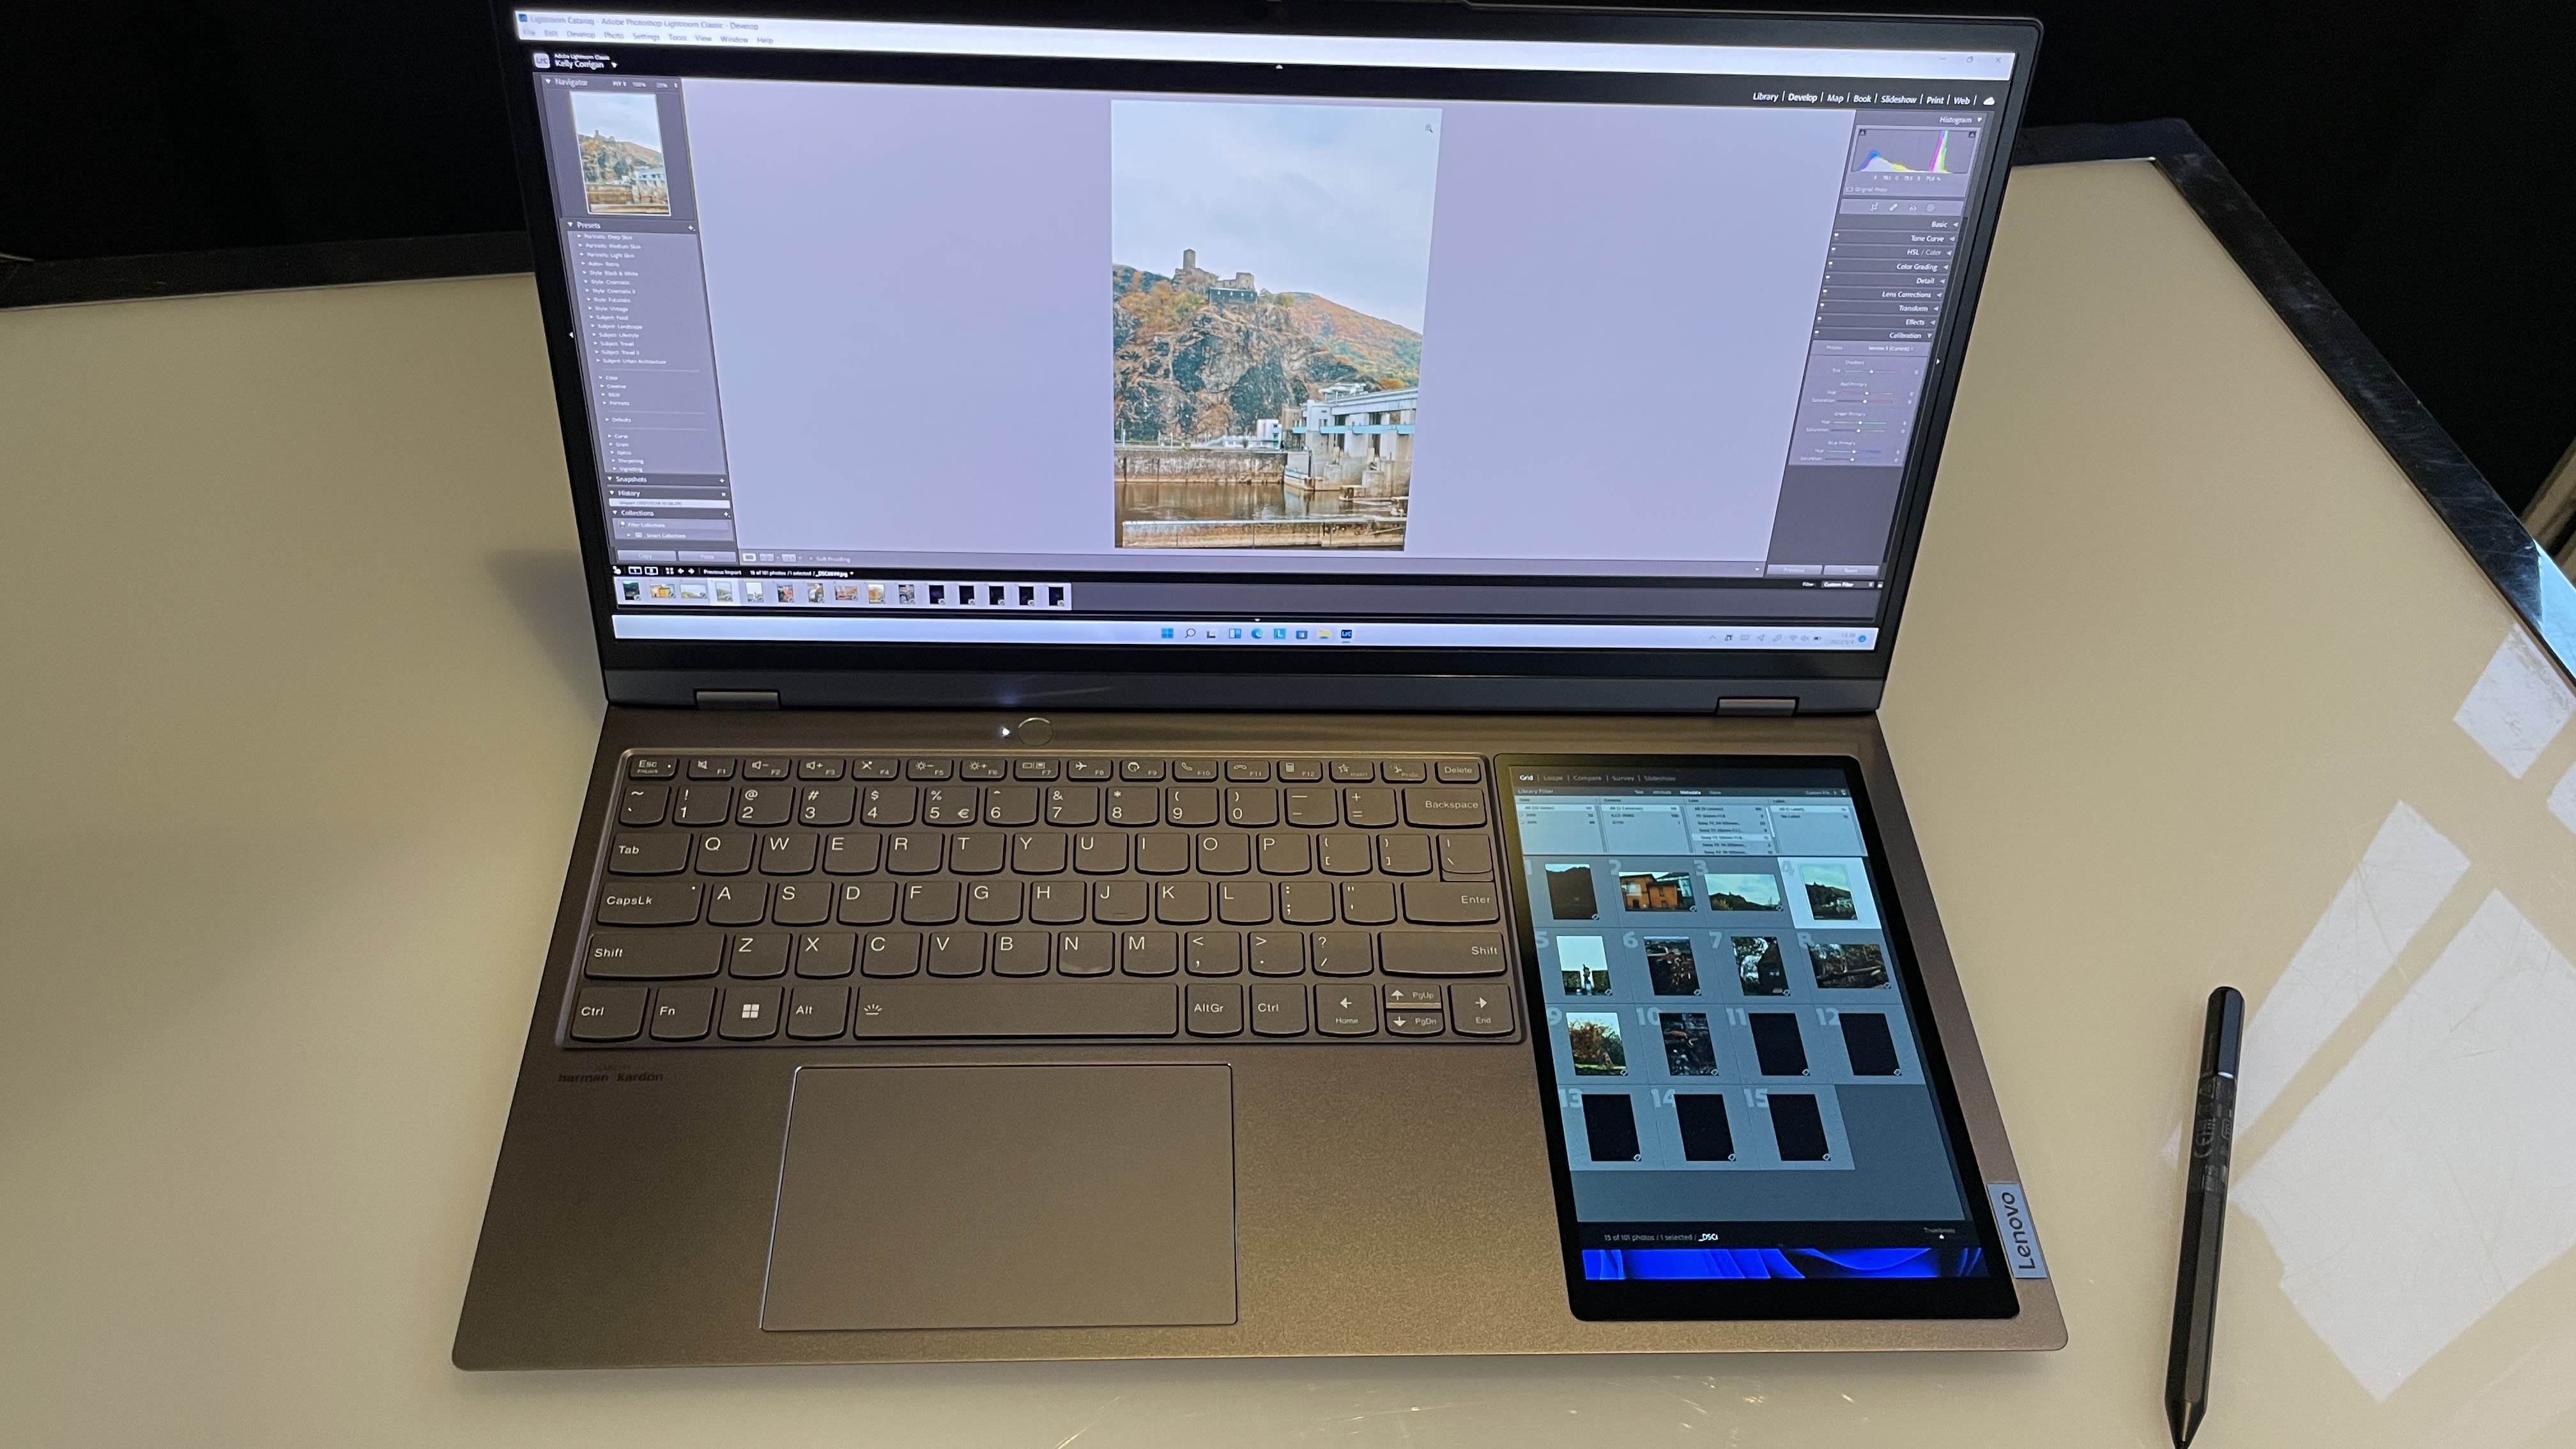 Lenovo ThinkBook Plus Gen 3: Hands-on with this amazing dual-screen laptop  from CES 2022 | CNN Underscored